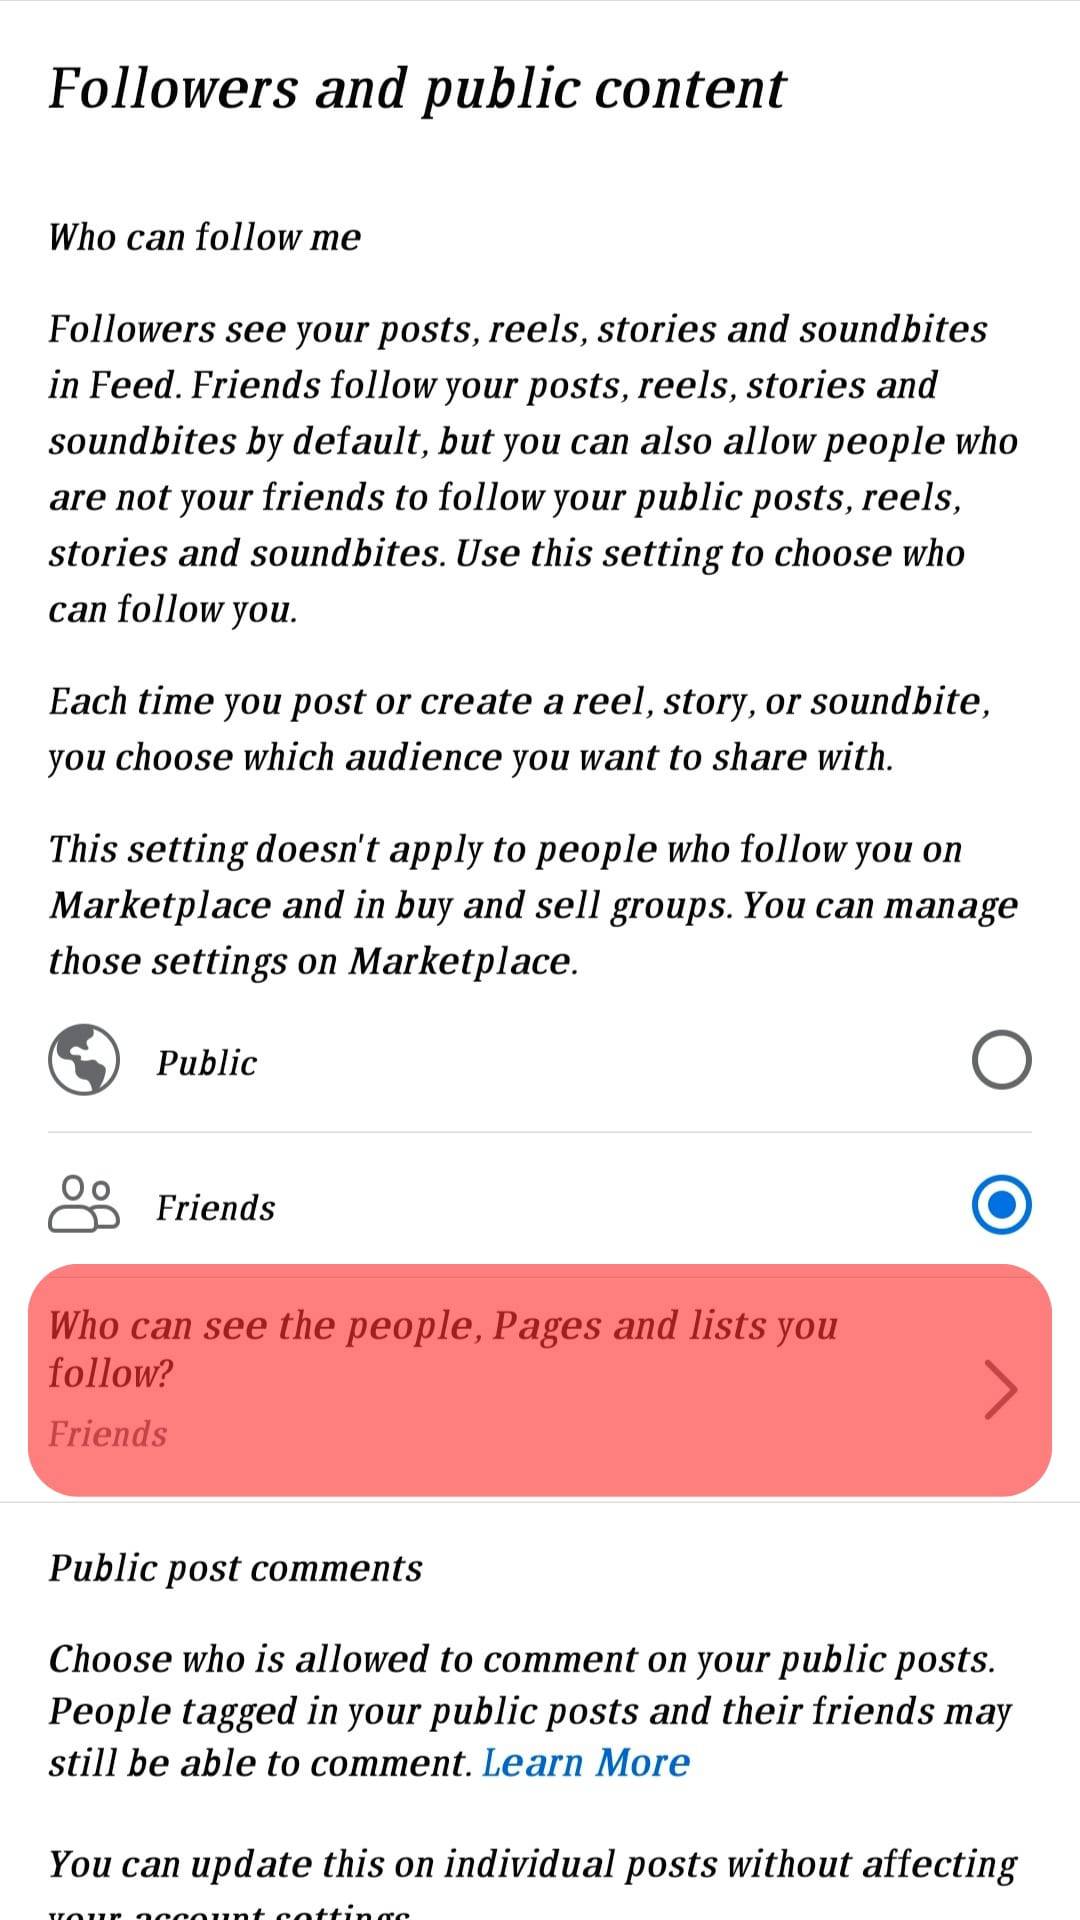 People Who Can View The People, Pages, And Lists You Follow.